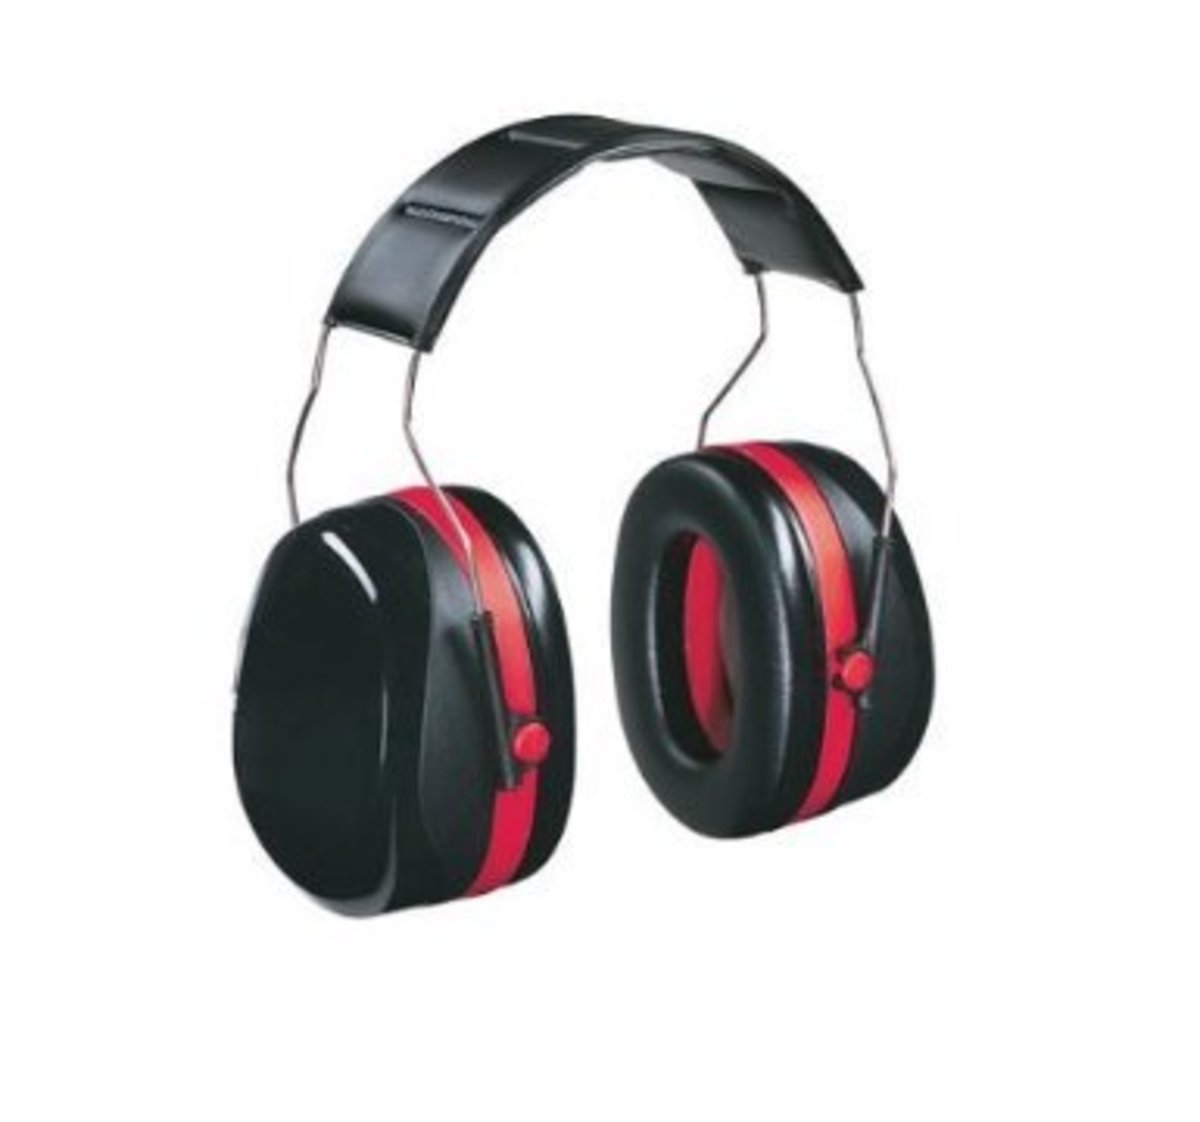 Prevent hearing loss by using hearing protection such as headphones or earplugs. 